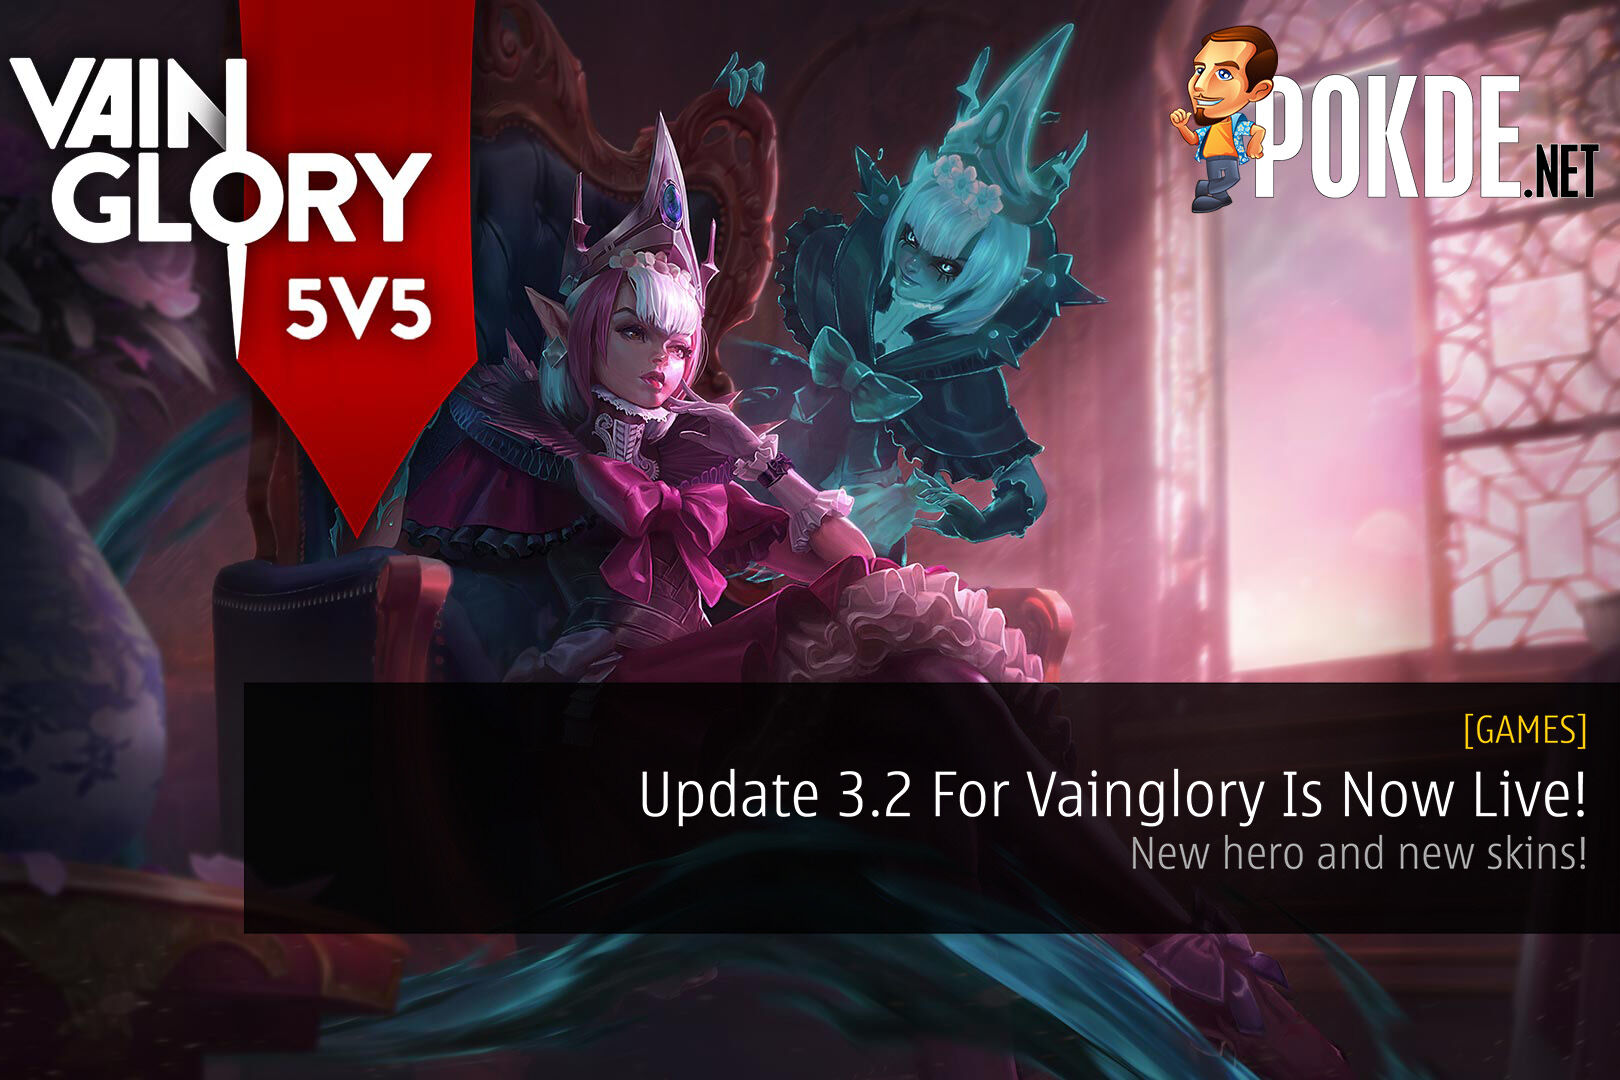 In Case You Missed It, Update 3.2 For Vainglory Is Now Live! 30